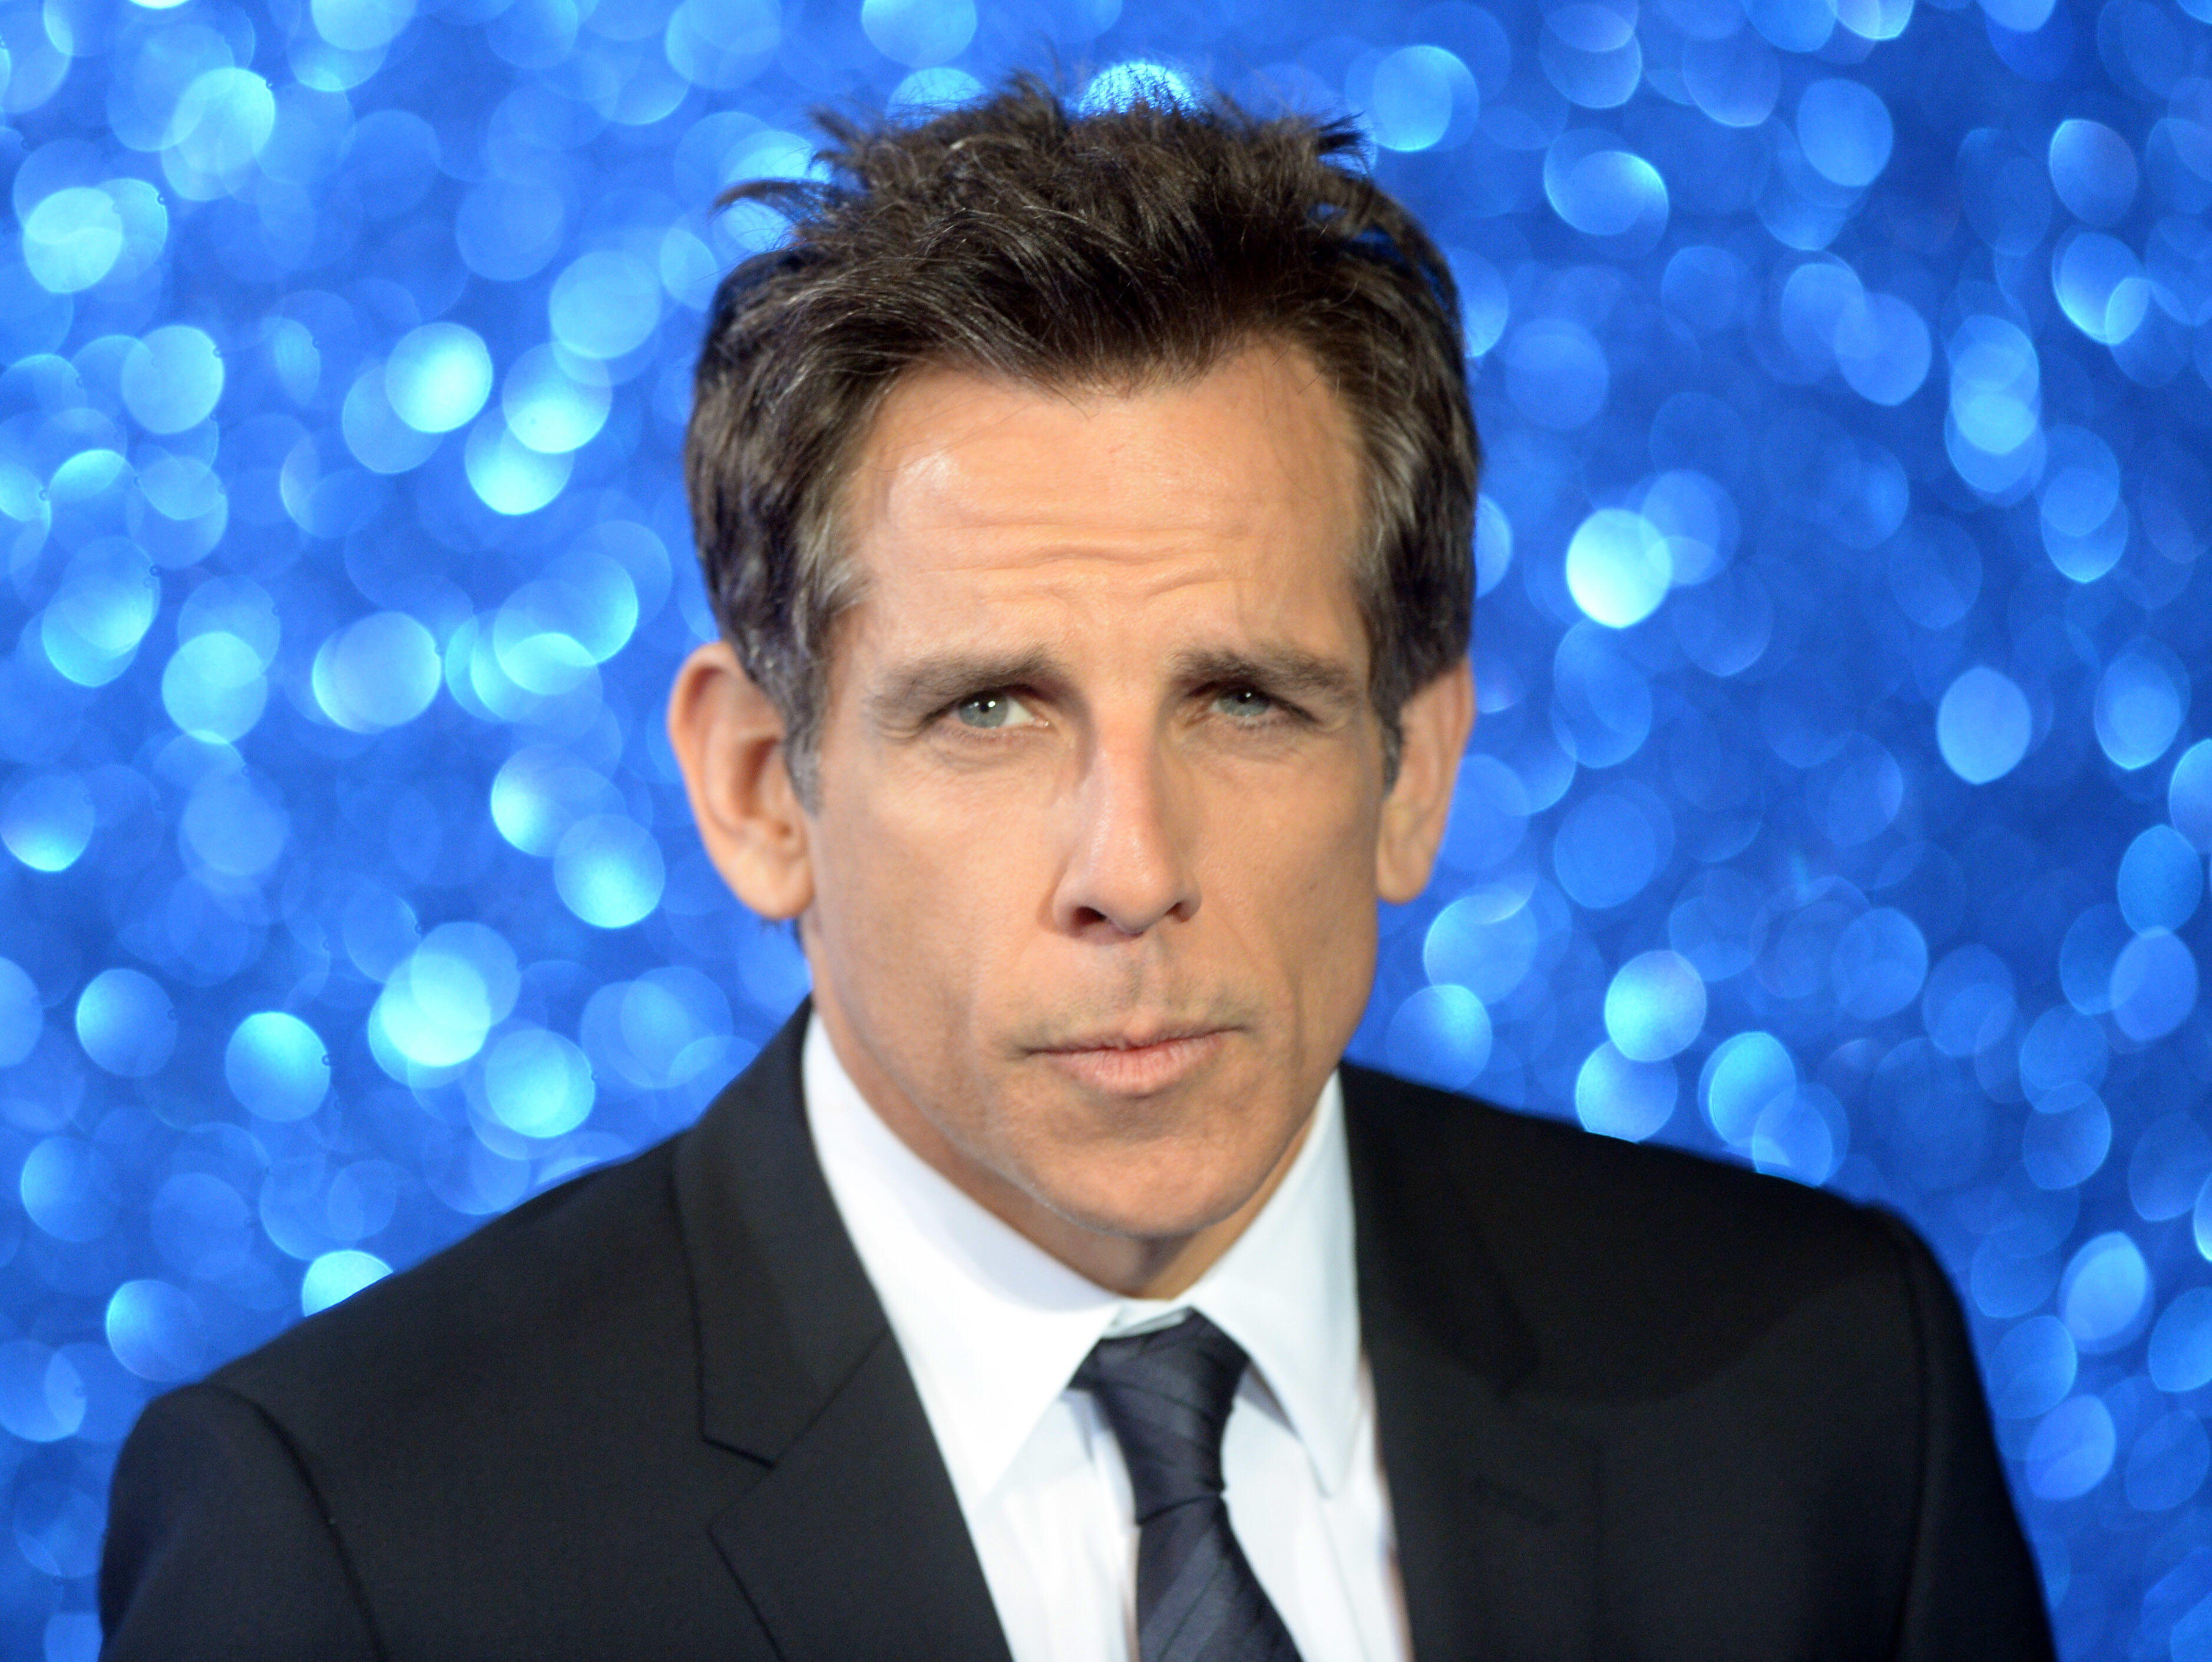 Ben Stiller attends the premiere of Zoolander No. 2 at Empire, Leicester Square.